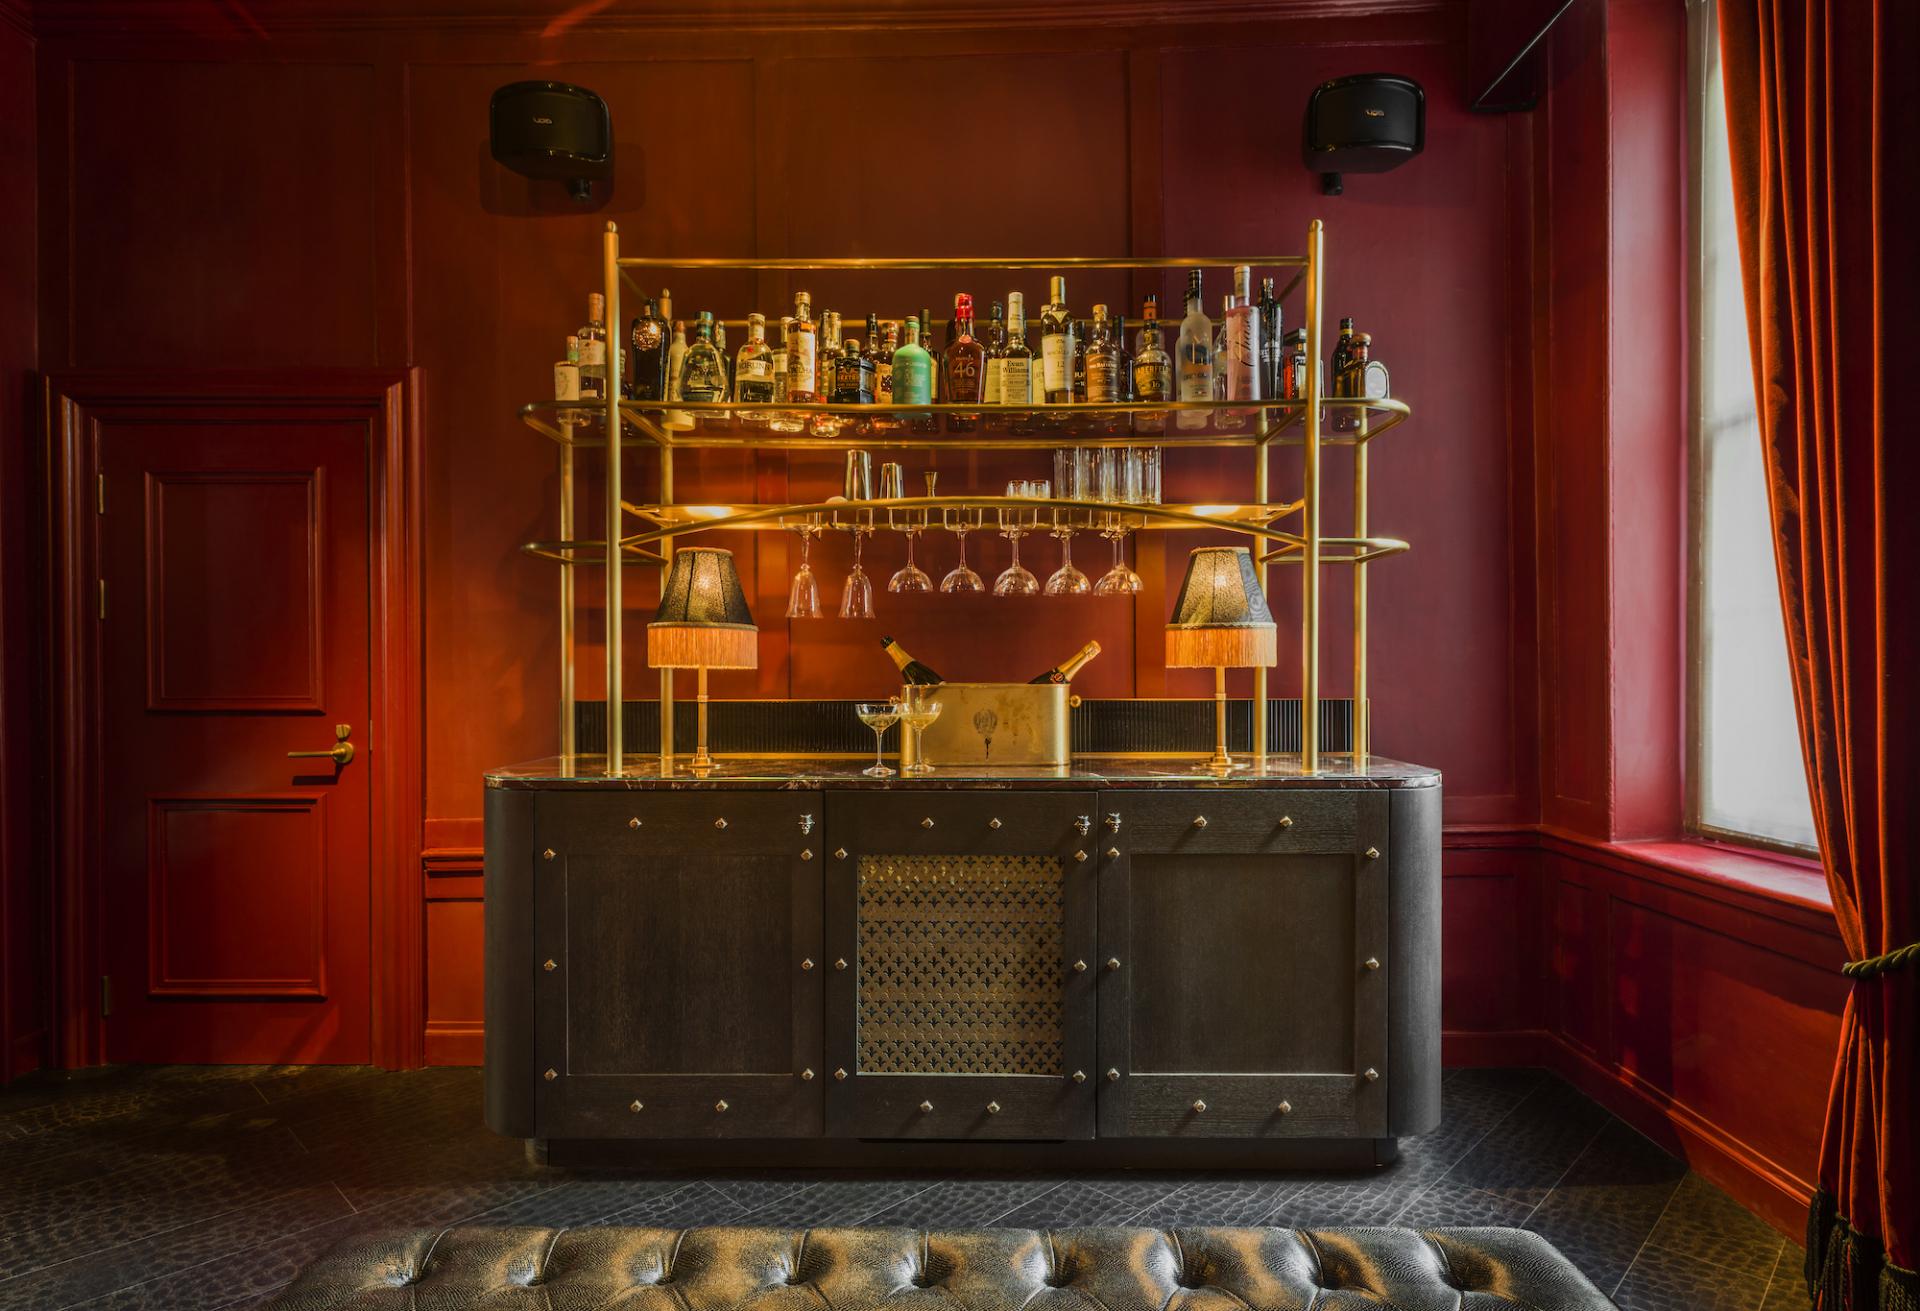 The New Chateau Denmark in London is a Whimsical Celebration of Rock-and-roll Chic